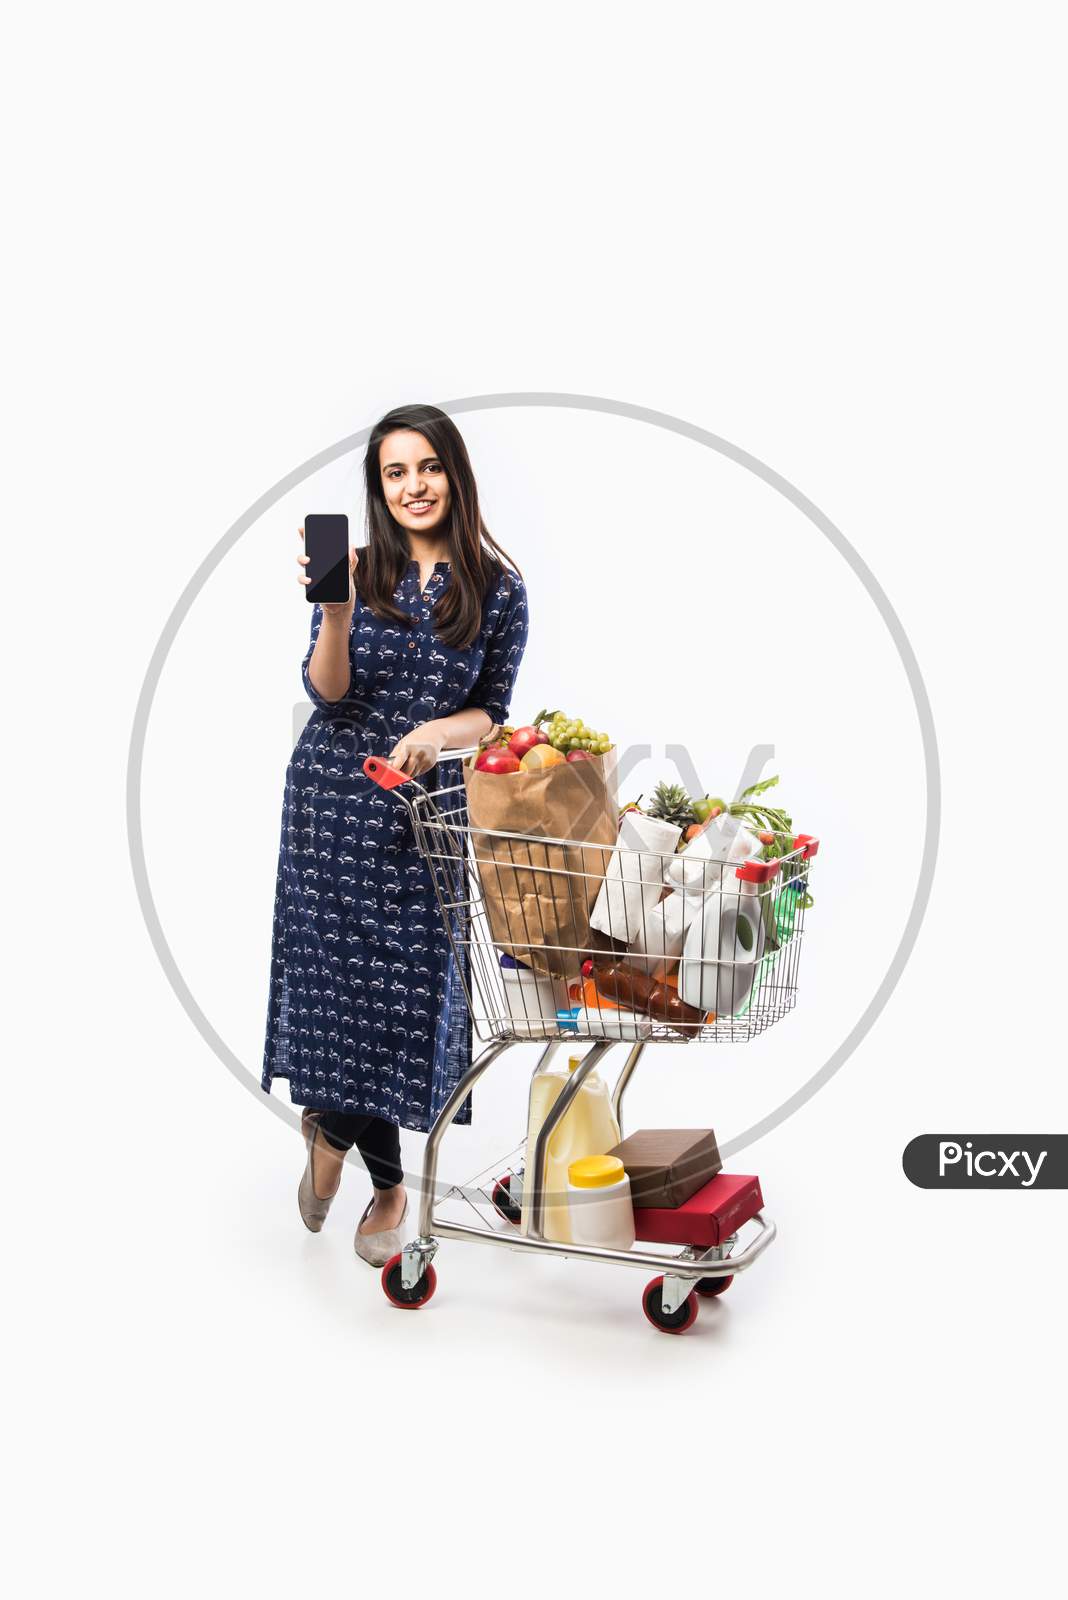 Indian young woman with shopping cart or trolly full of grocery, vegetables and fruits